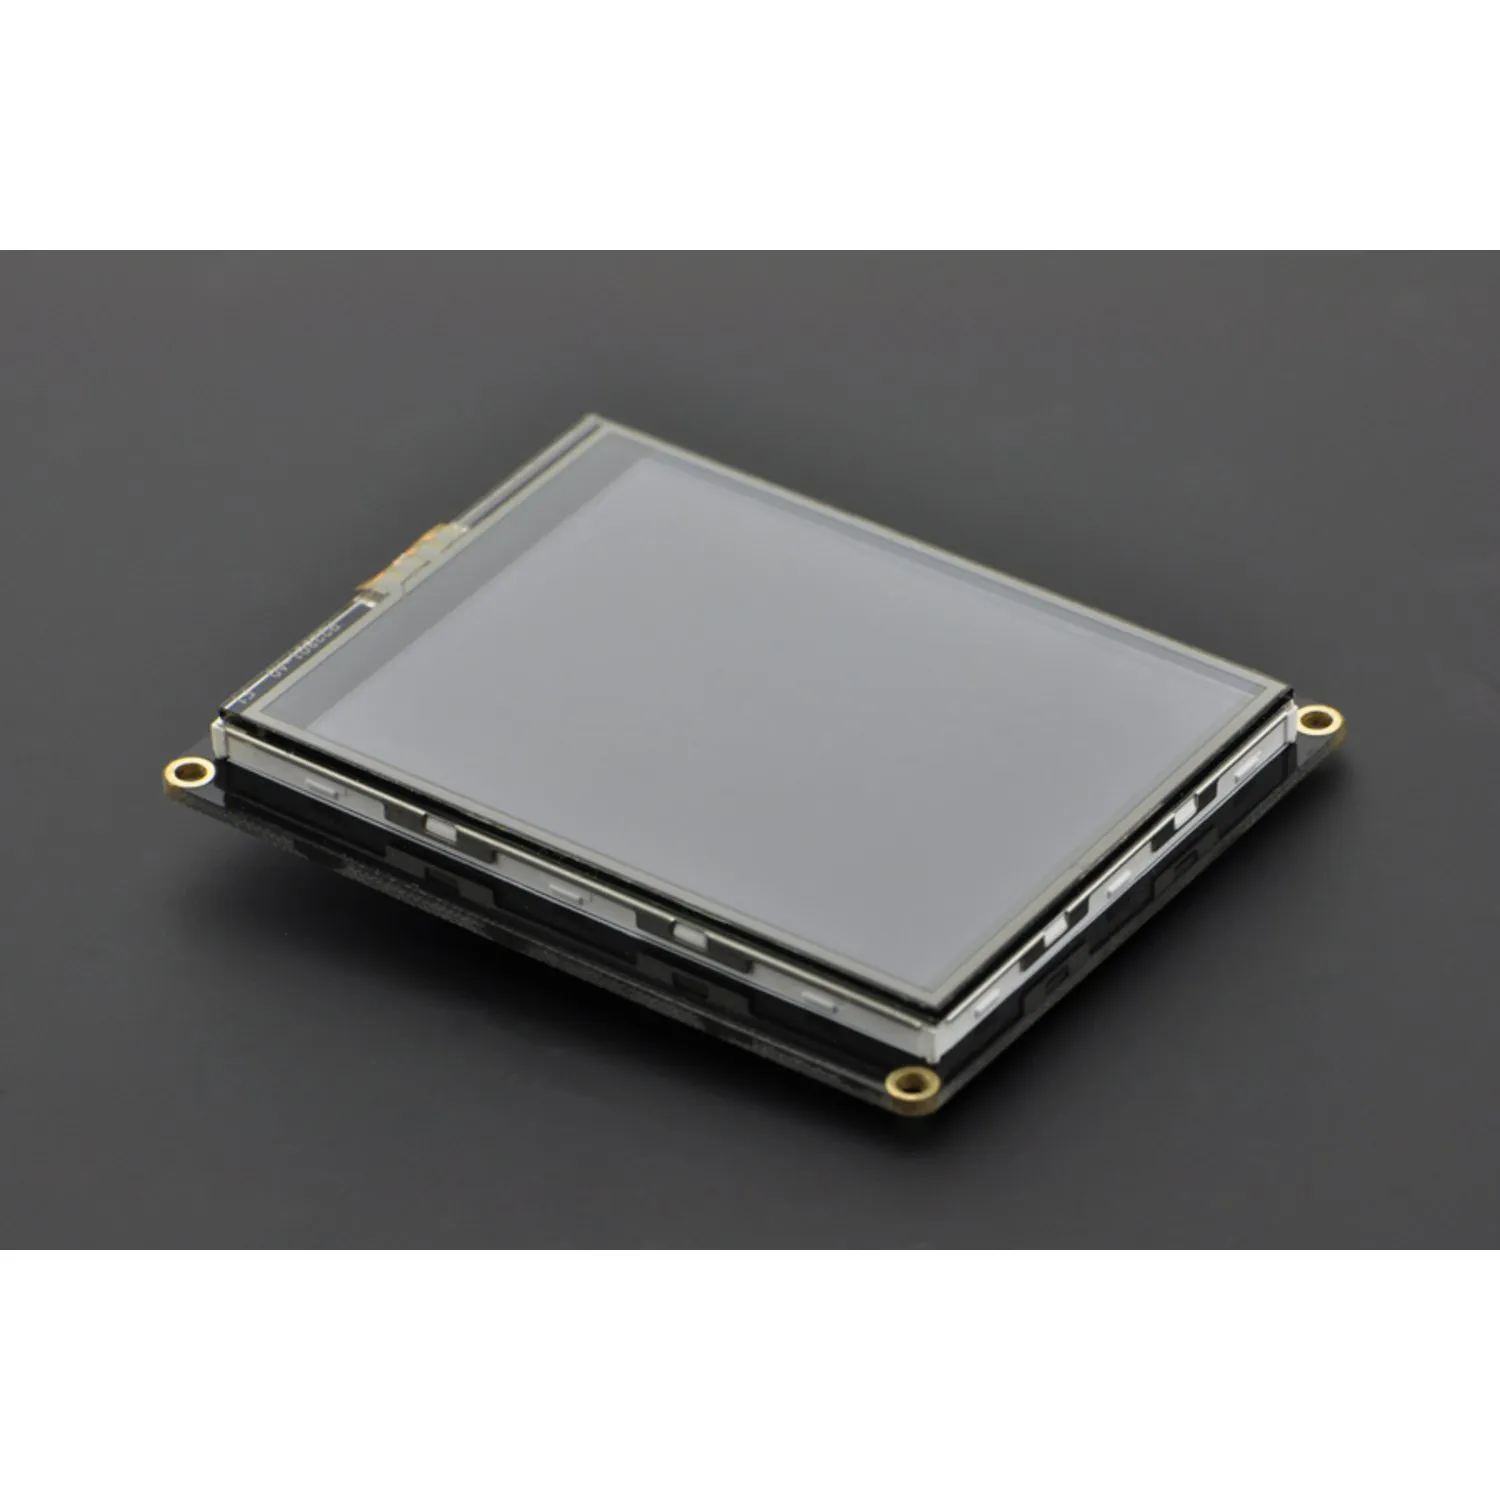 Photo of 2.8 USB TFT Touch Display Screen for Raspberry Pi